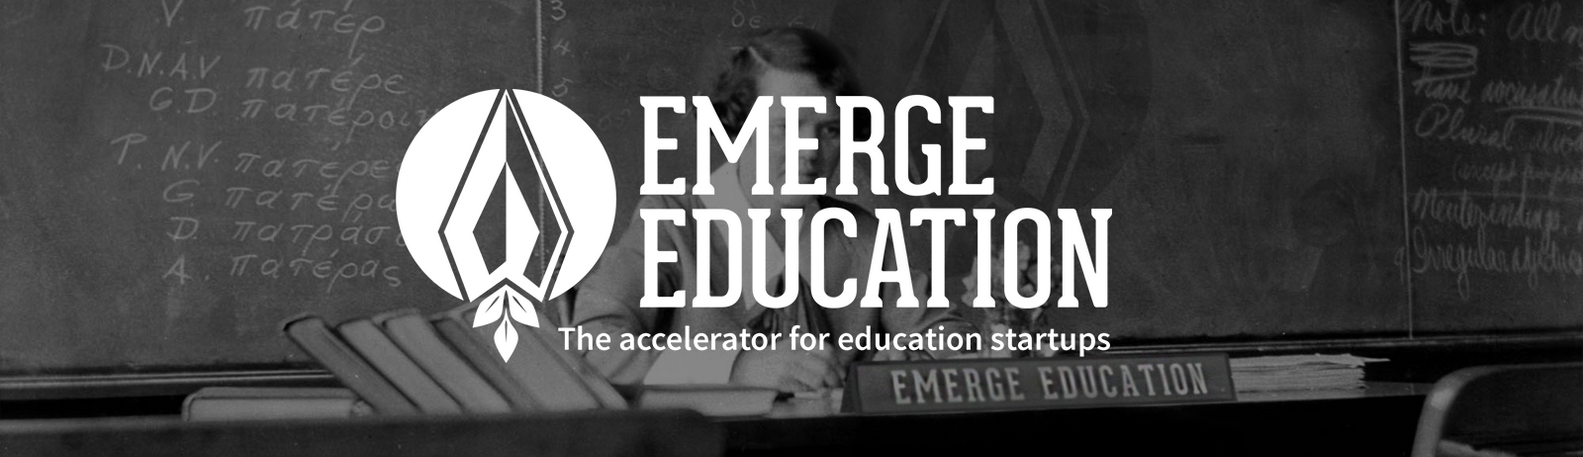 Emerge Education cover